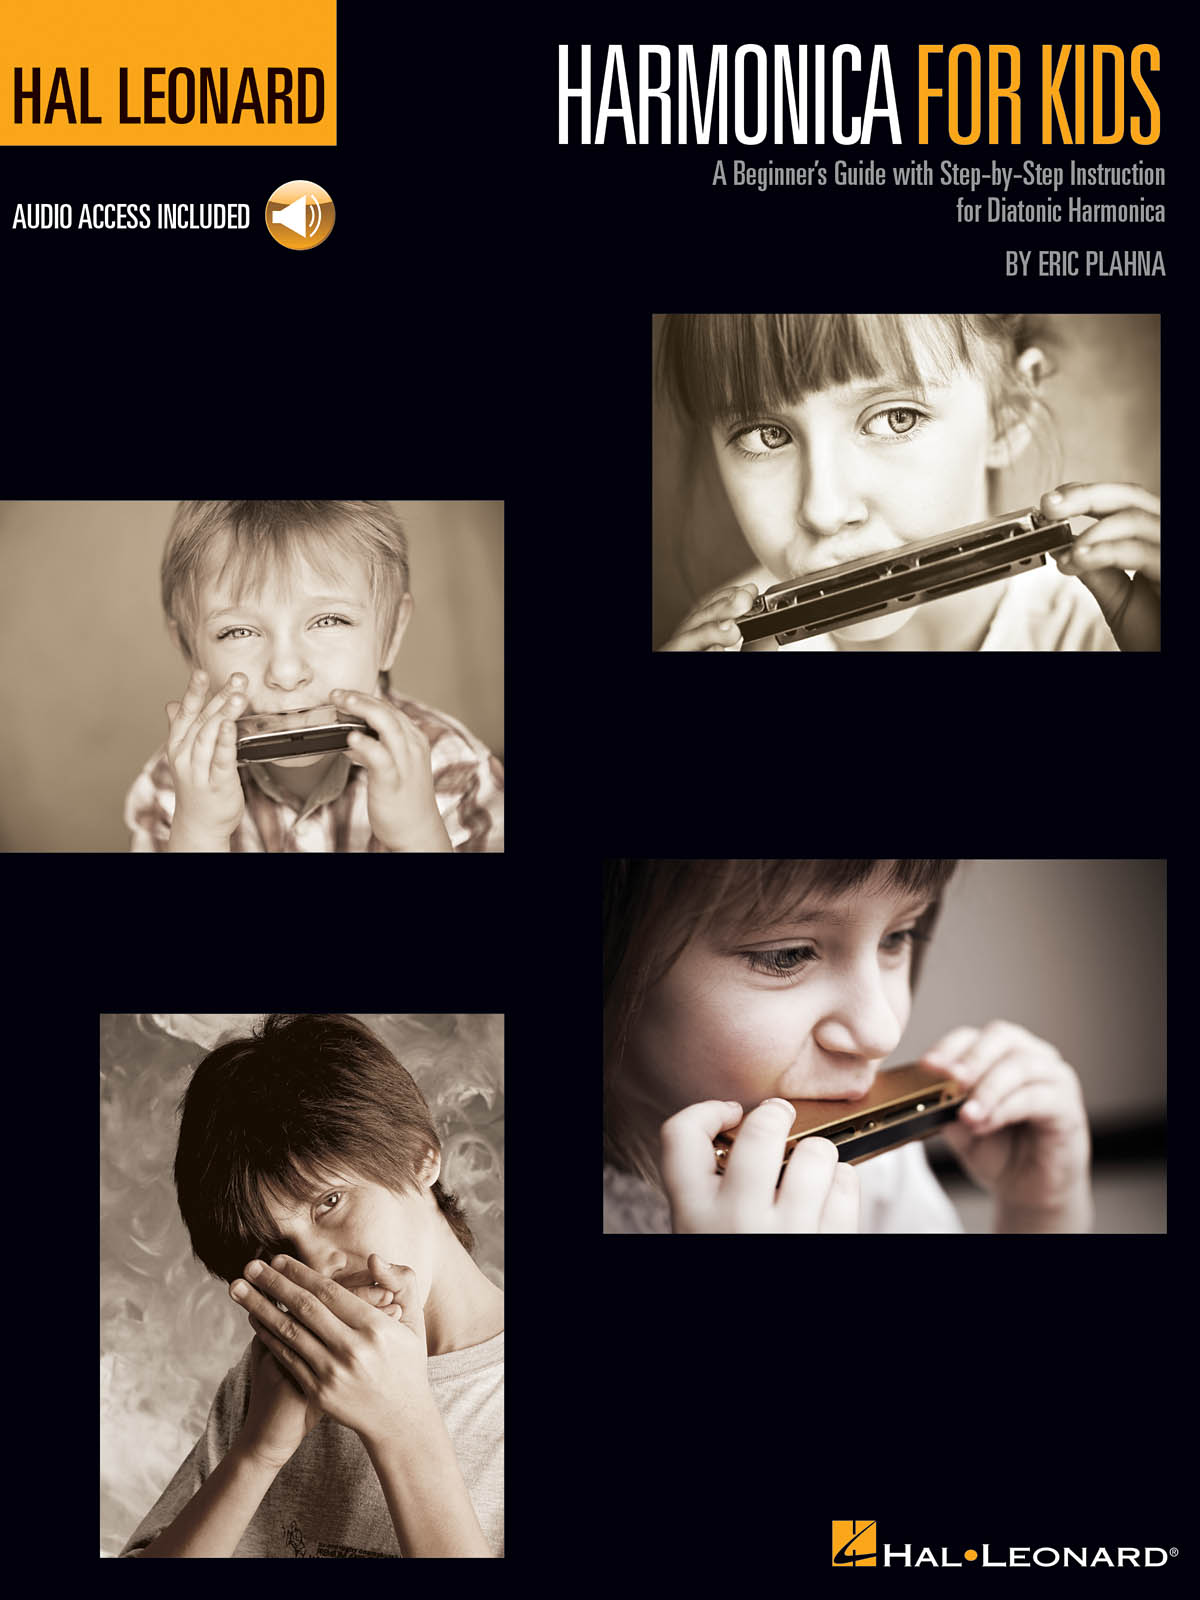 Harmonica for Kids - A Beginner's Guide with Step-by-Step Instruction for Diatonic Harmonica - noty na foukací harmoniku